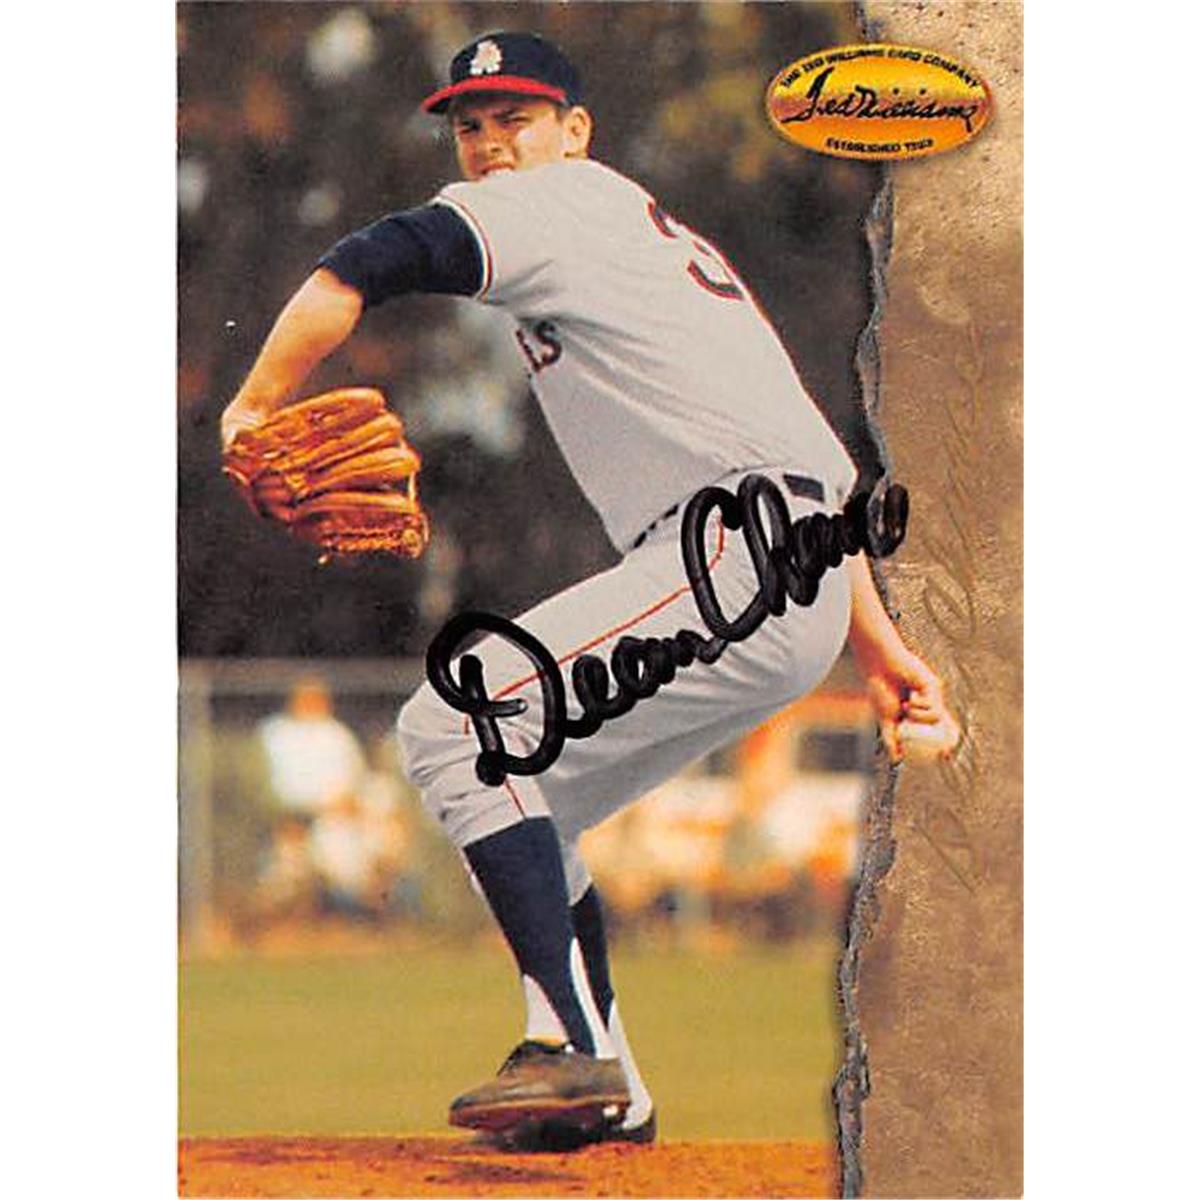 Picture of Autograph Warehouse 365622 Dean Chance Autographed Baseball Card - 1994 TWC 14